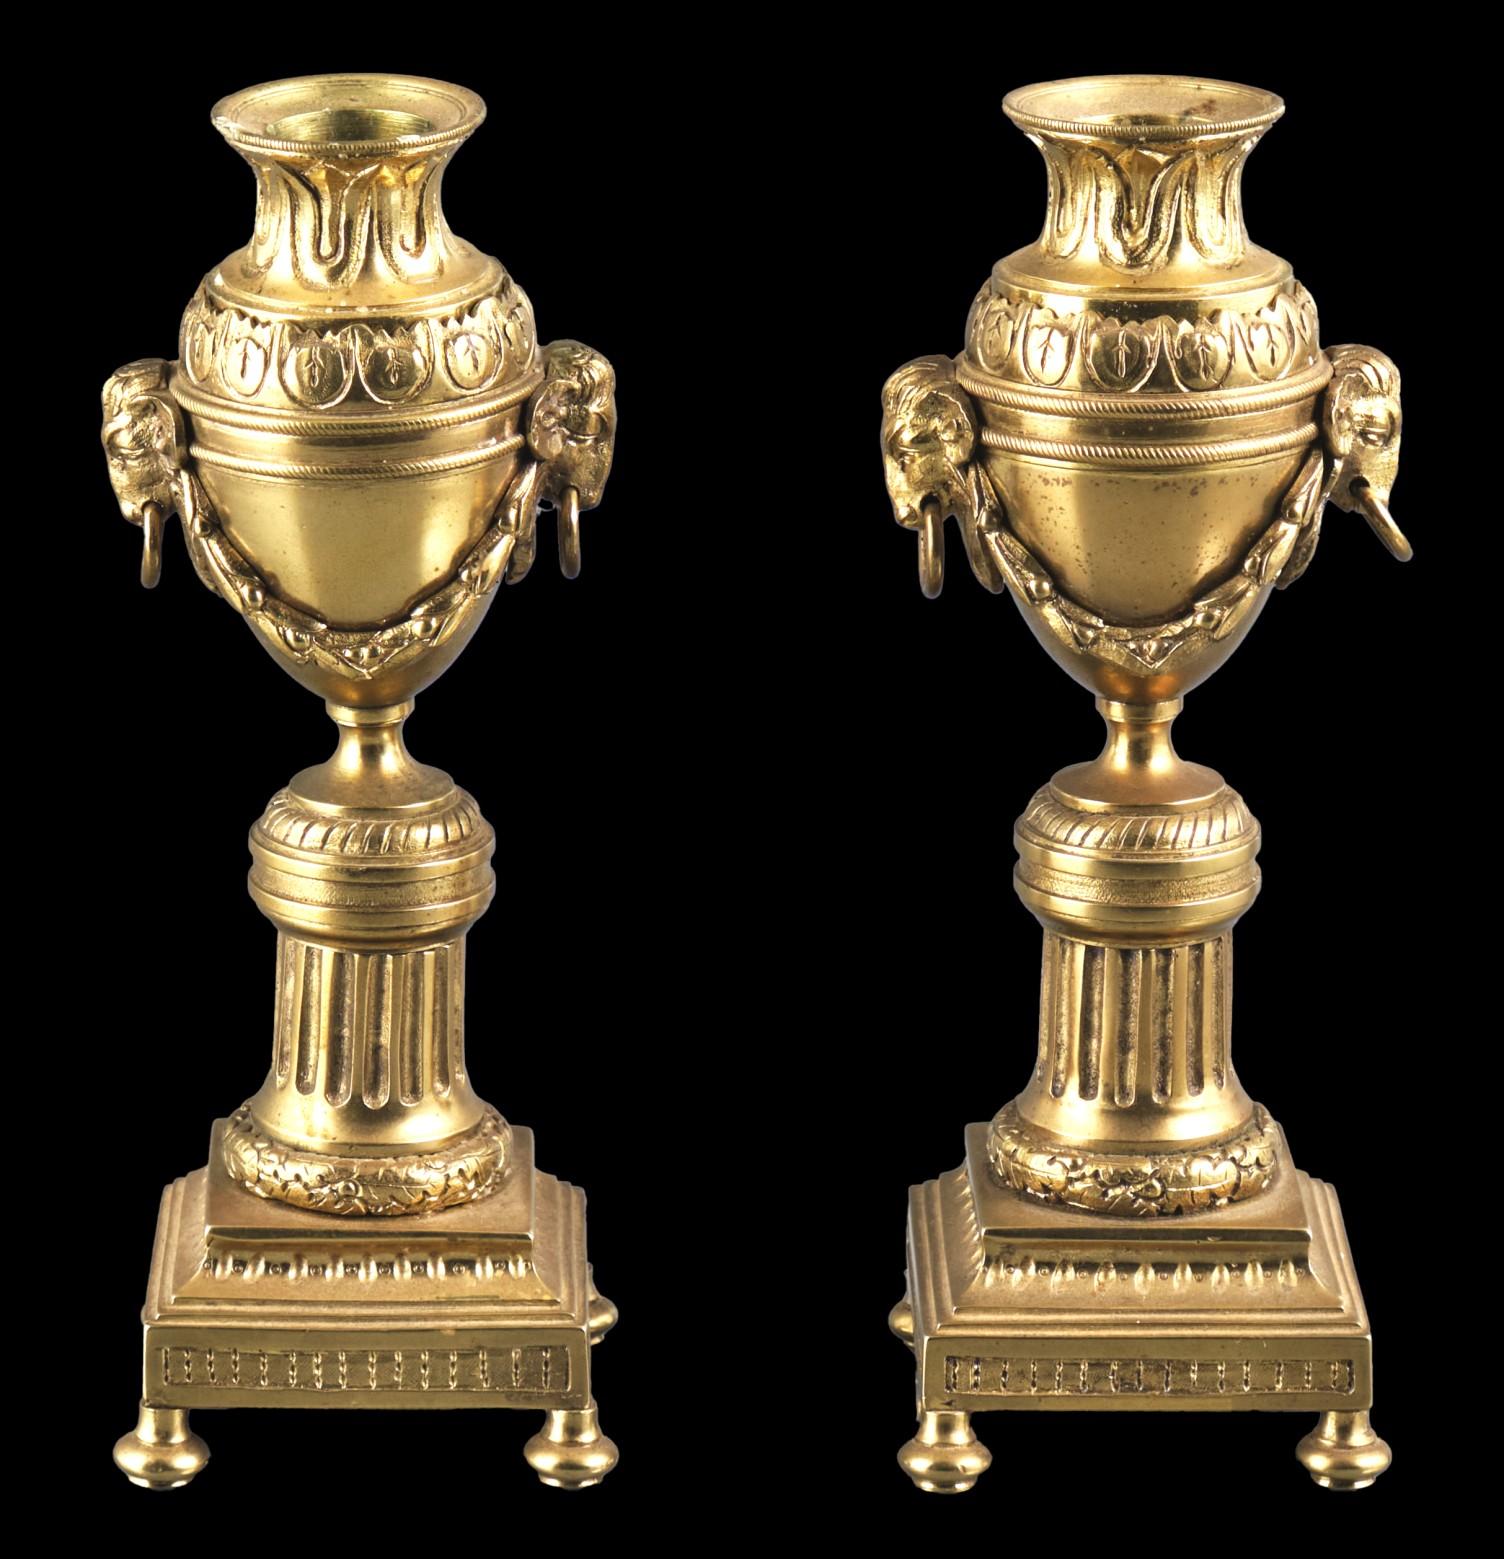 A Fine Pair of 19th C. Neoclassical Style Gilt Bronze Cassolettes / Candlesticks In Good Condition For Sale In Ottawa, Ontario